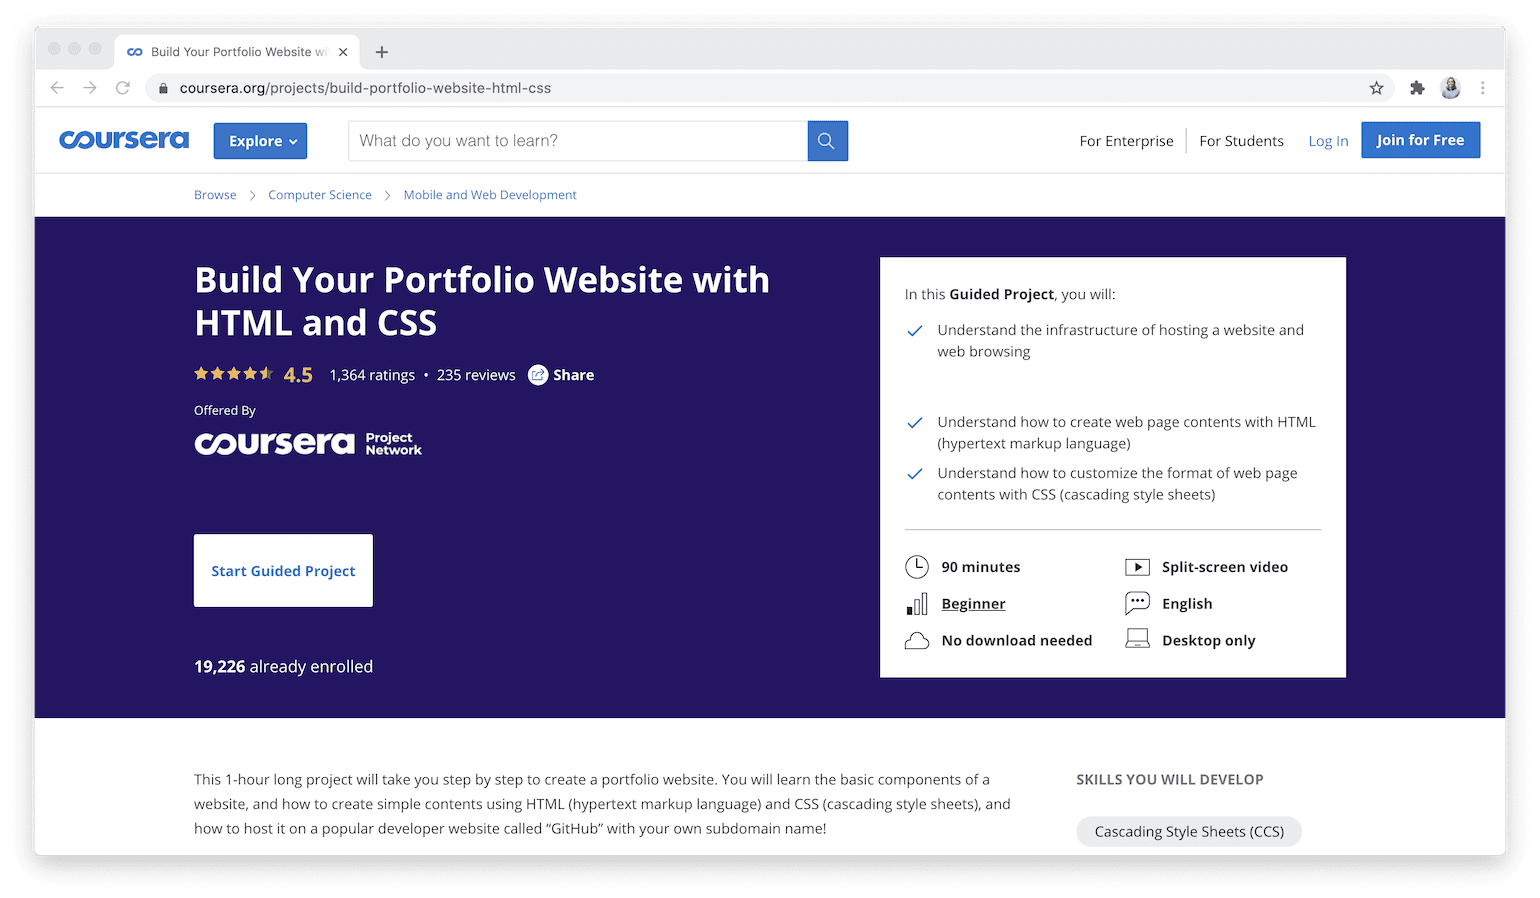 Build Your Portfolio Website with HTML and CSS - Coursera